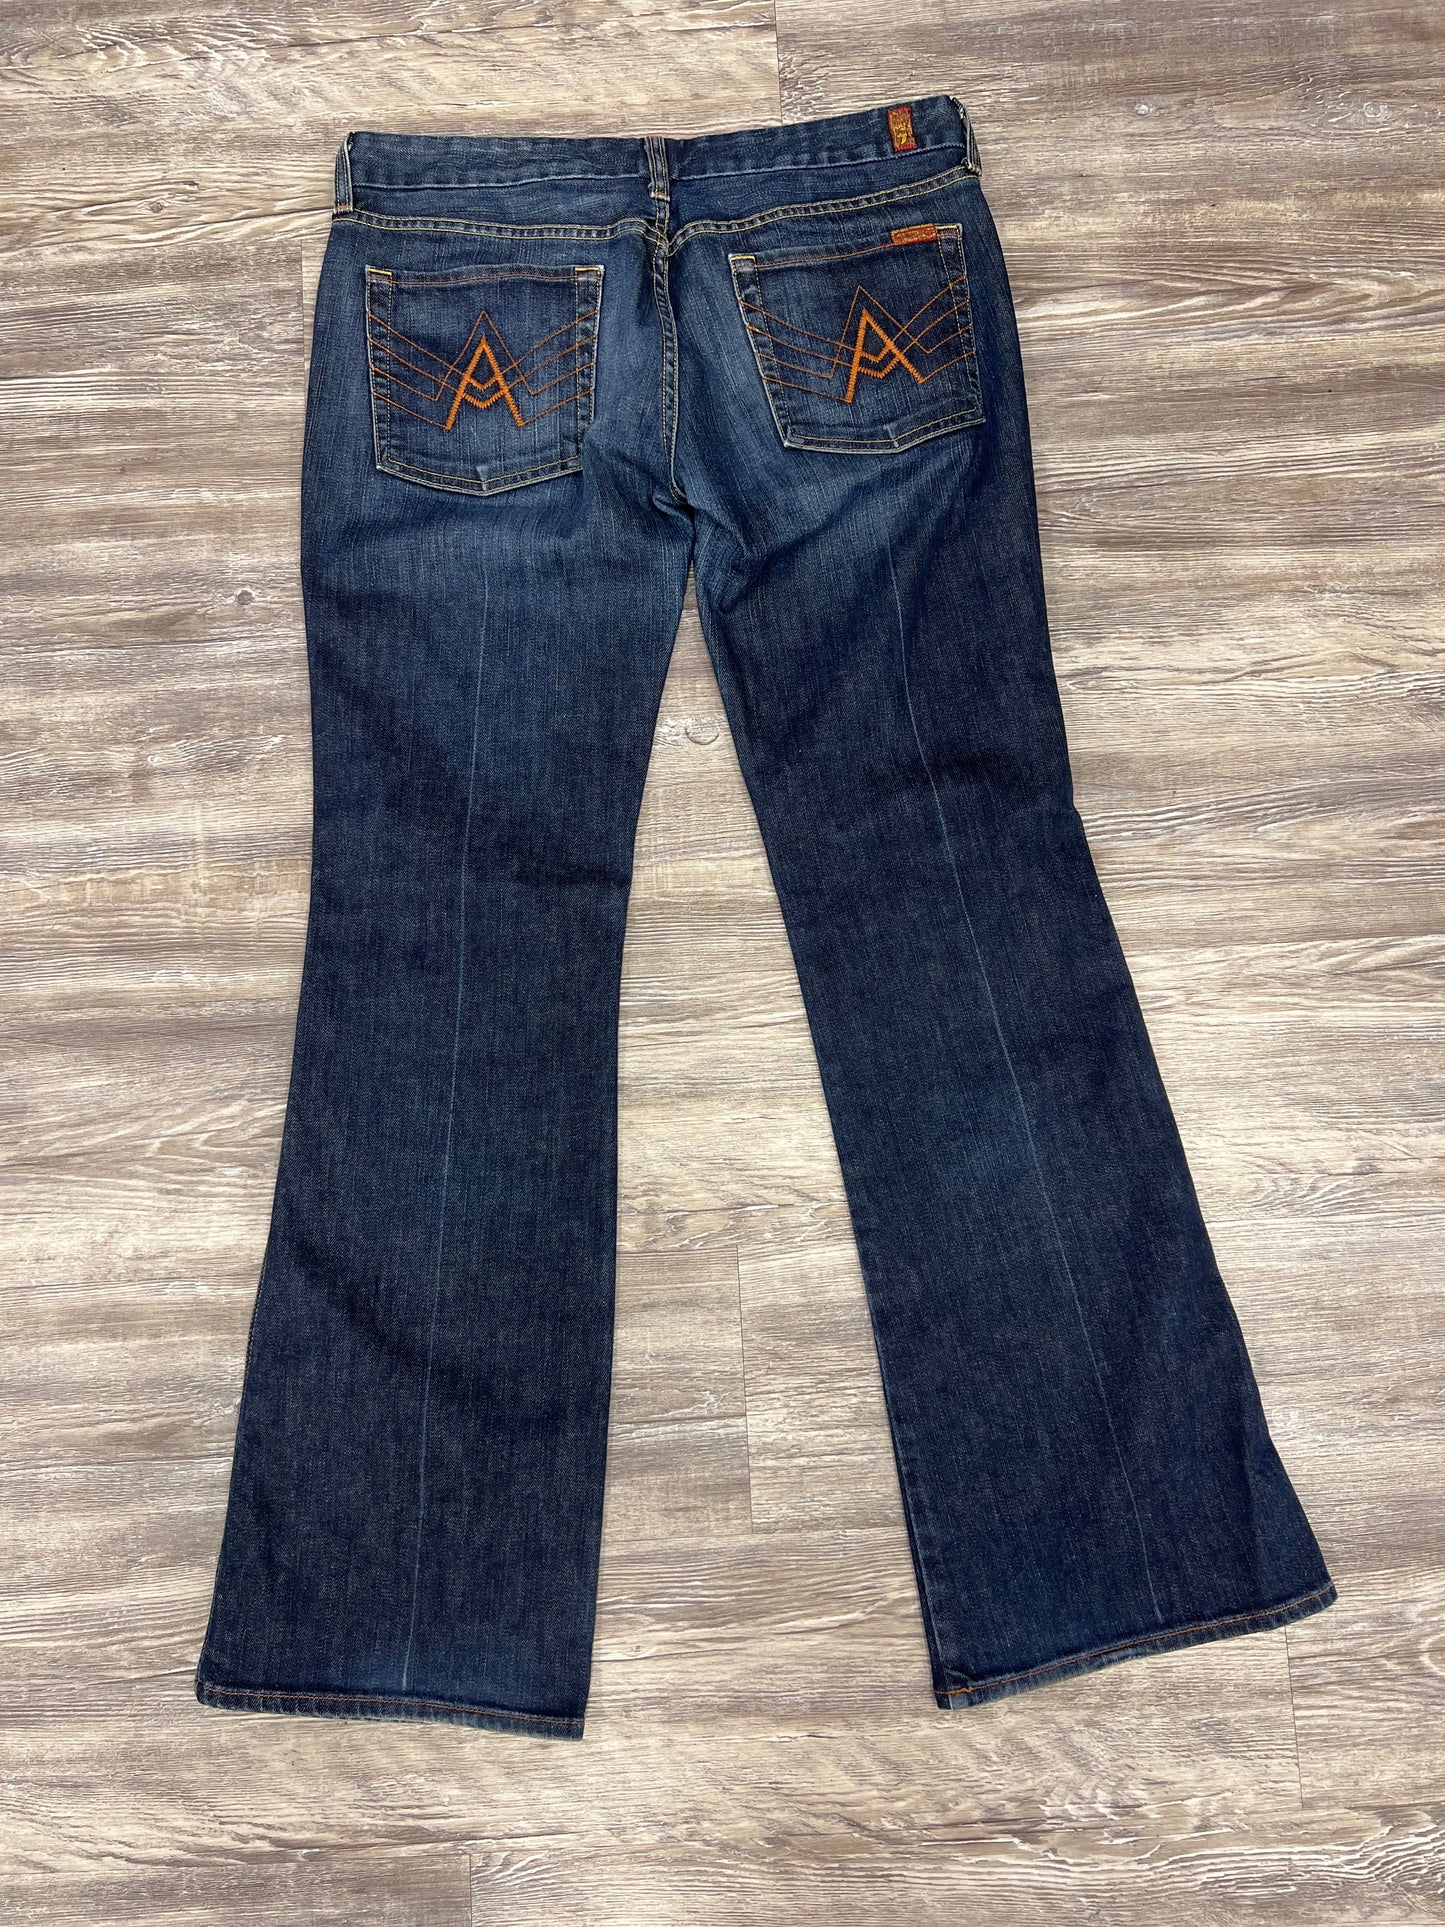 Jeans Designer By 7 For All Mankind Size: 14